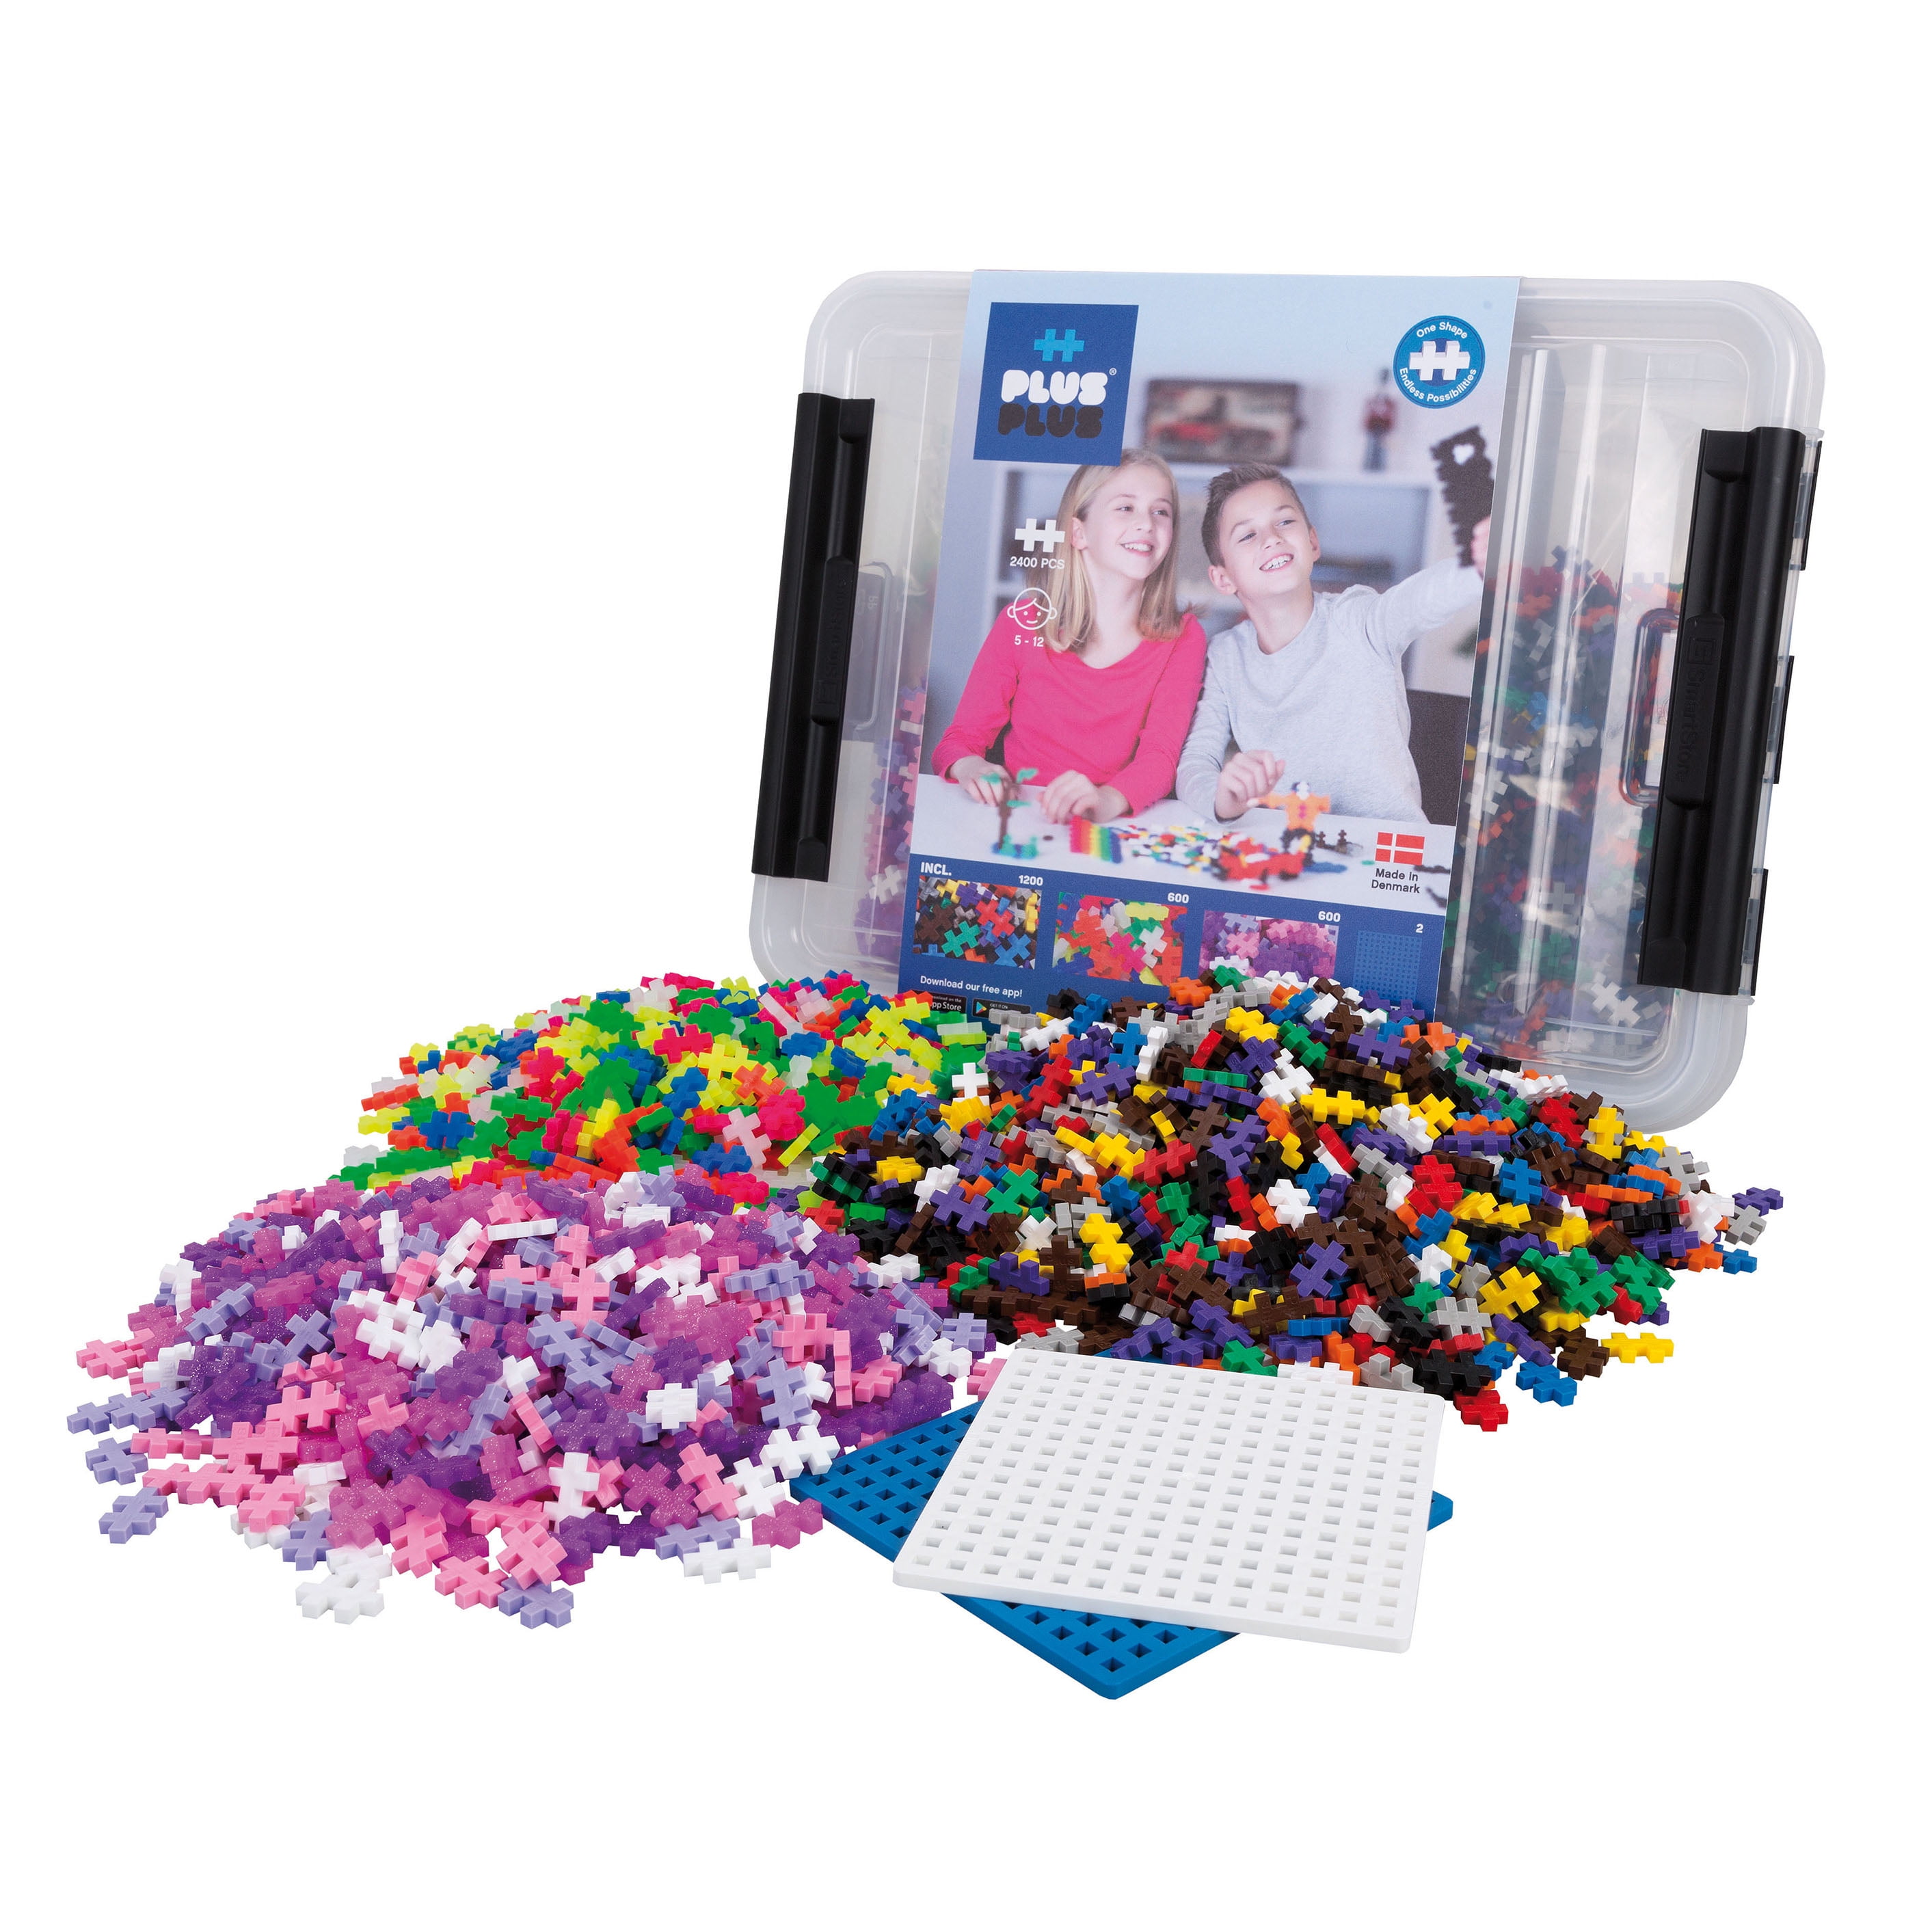 Plus Plus - 2400 Pieces in Storage Tub - Basic, Neon, & Glitter Mix with 2  Baseplates - Construction Building STEM Toy, Interlocking Mini Puzzle Blocks  for Kids 